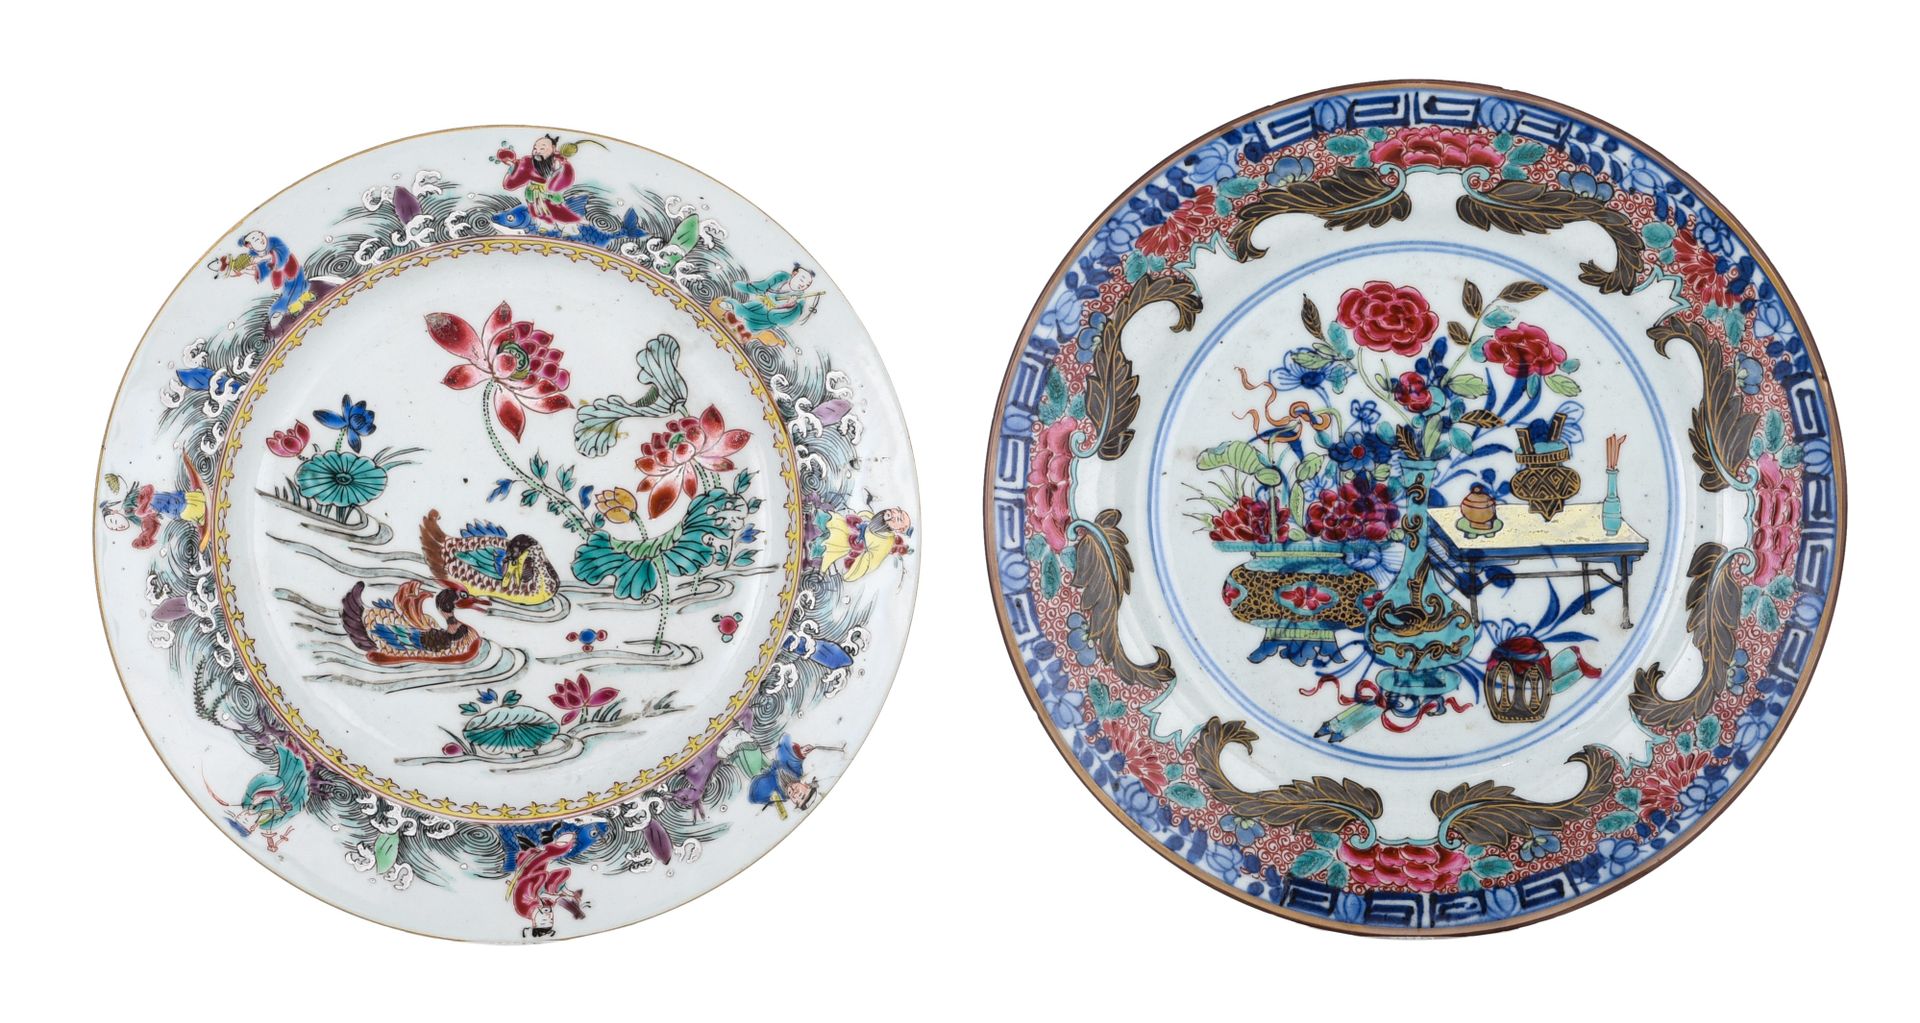 Two Chinese famille rose export porcelain dishes, 18thC, dia. 22,5 - 23,5 cm 两个中&hellip;